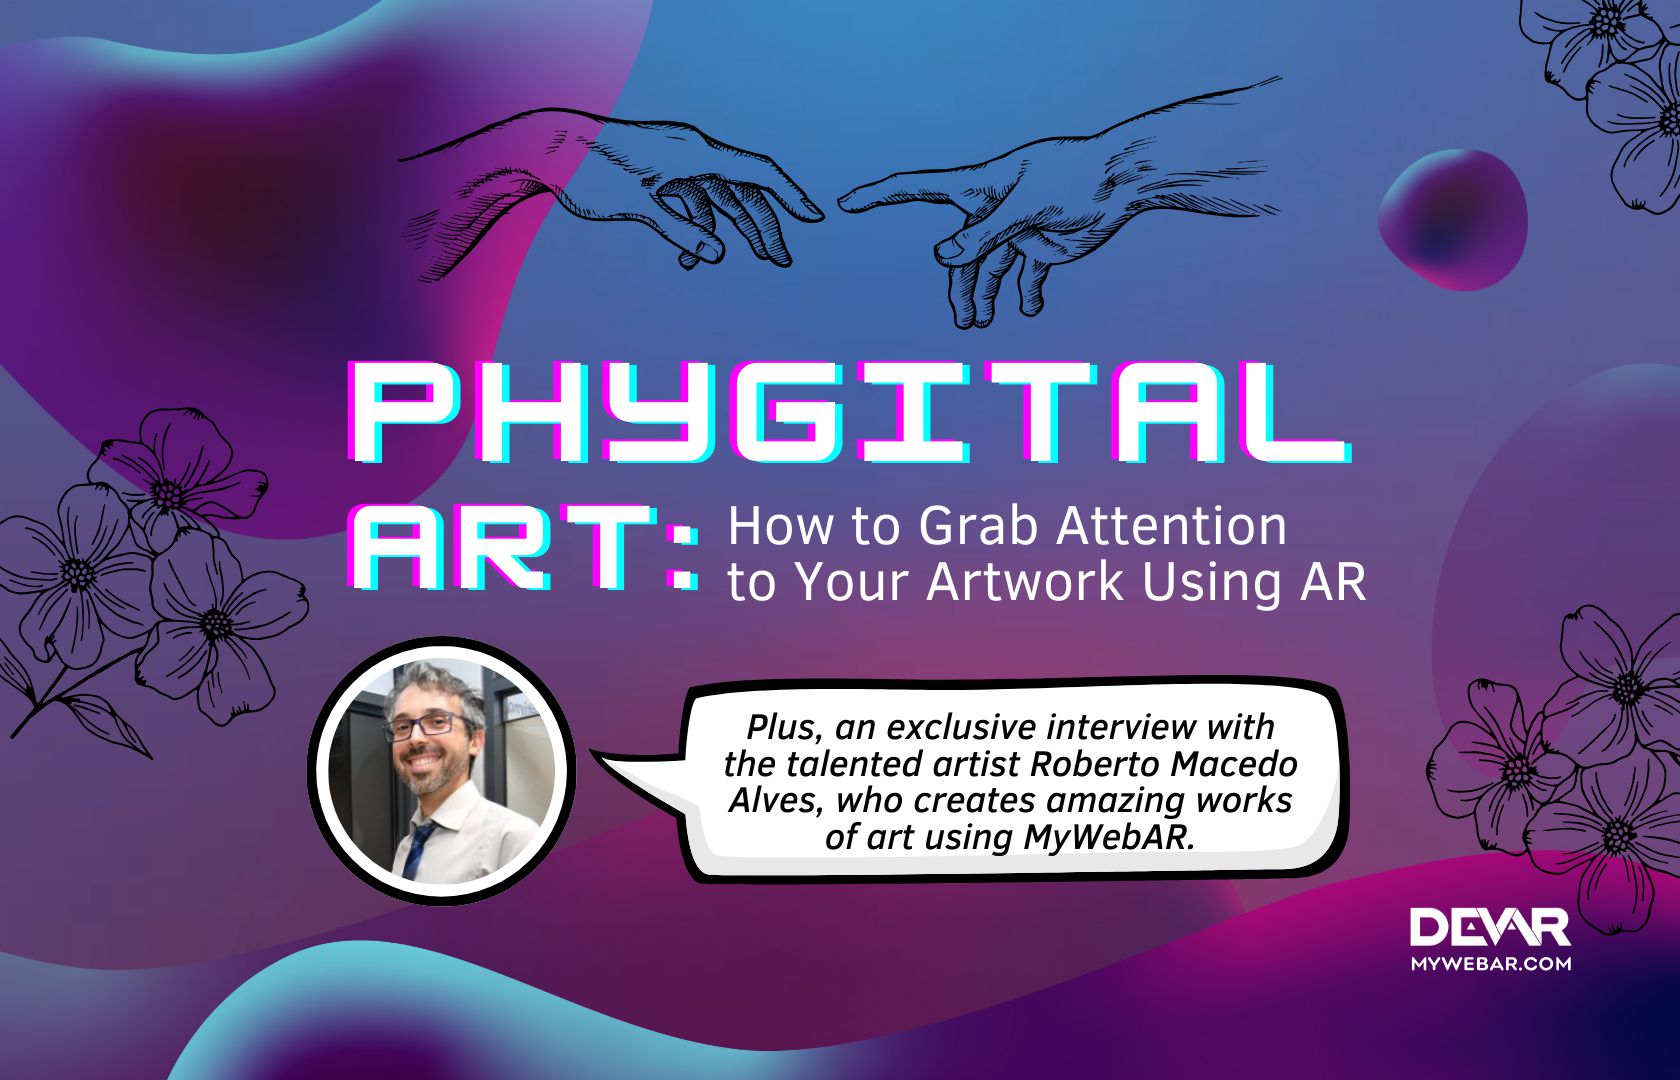 Phygital Art: How to Grab Attention to Your Artwork Using Augmented Reality